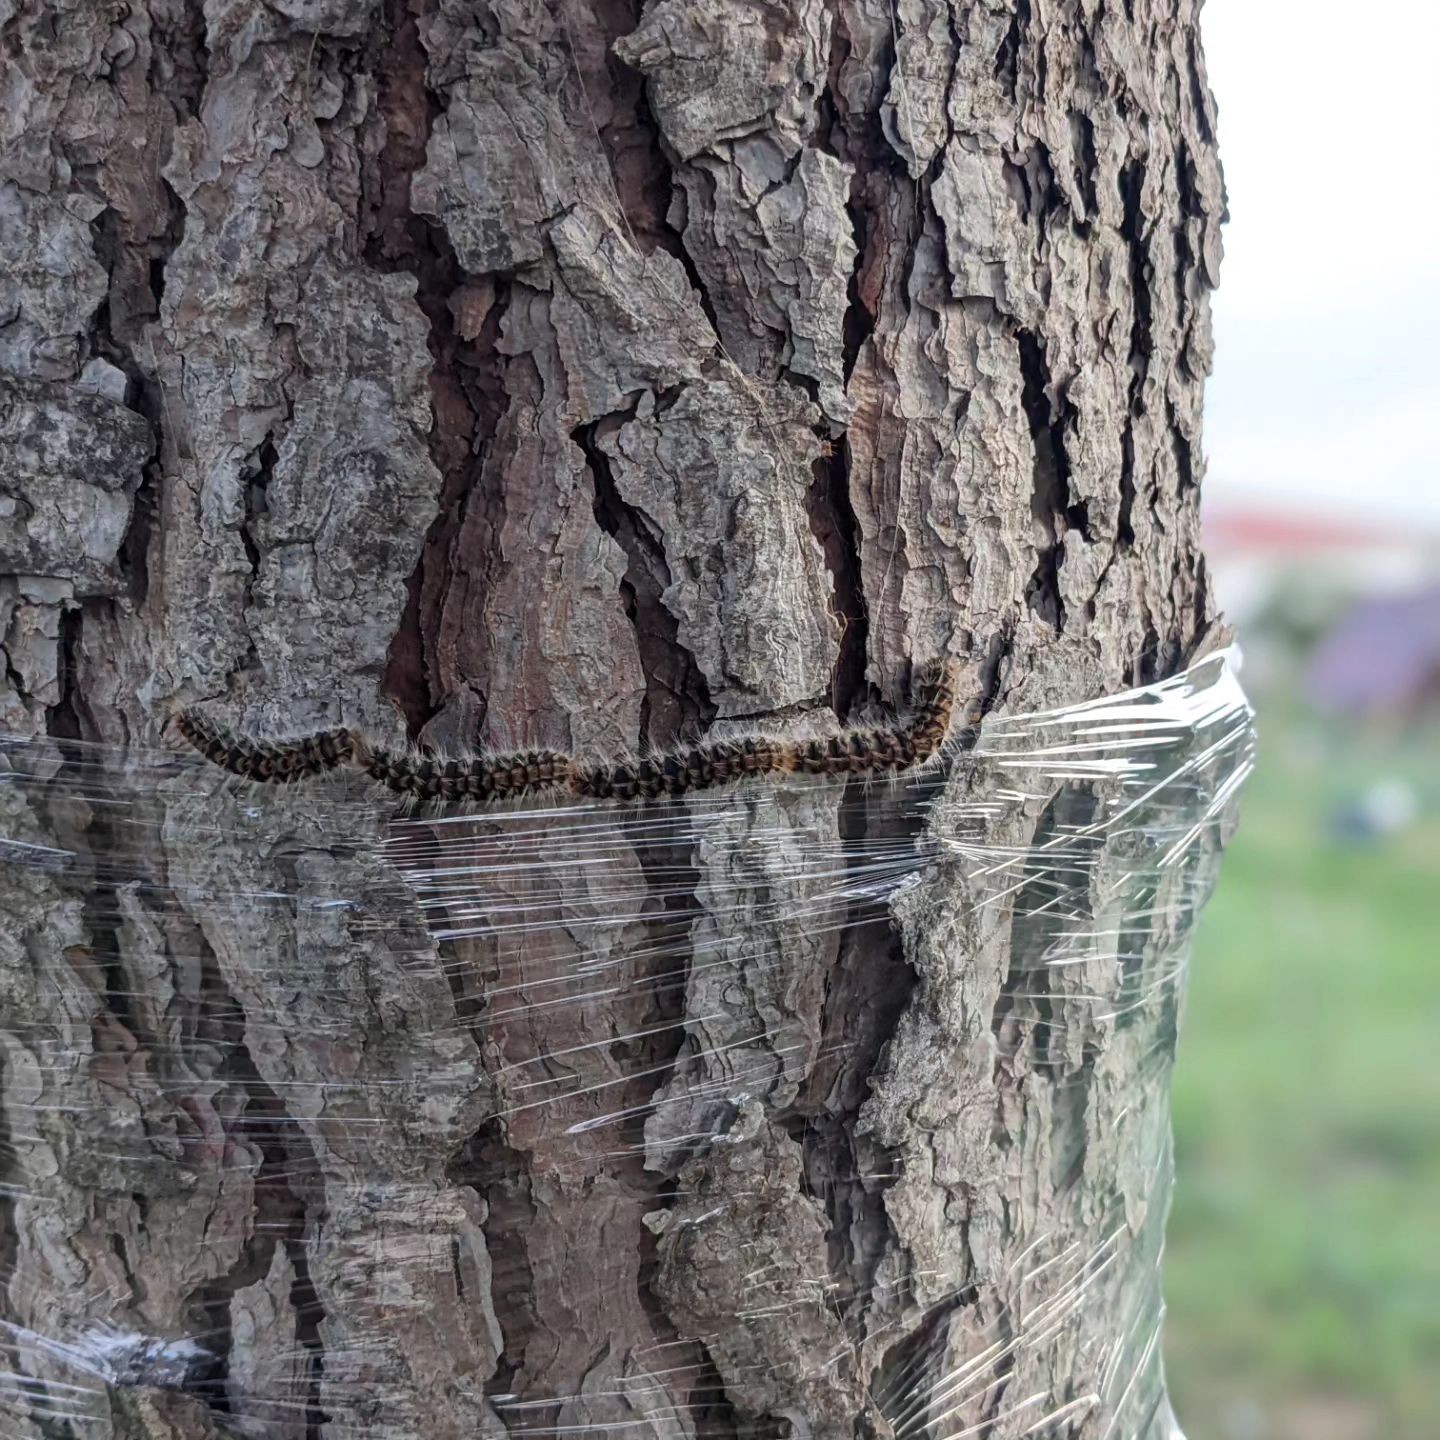 Confirmed: the pine processionary caterpillars don't like to walk on cling film